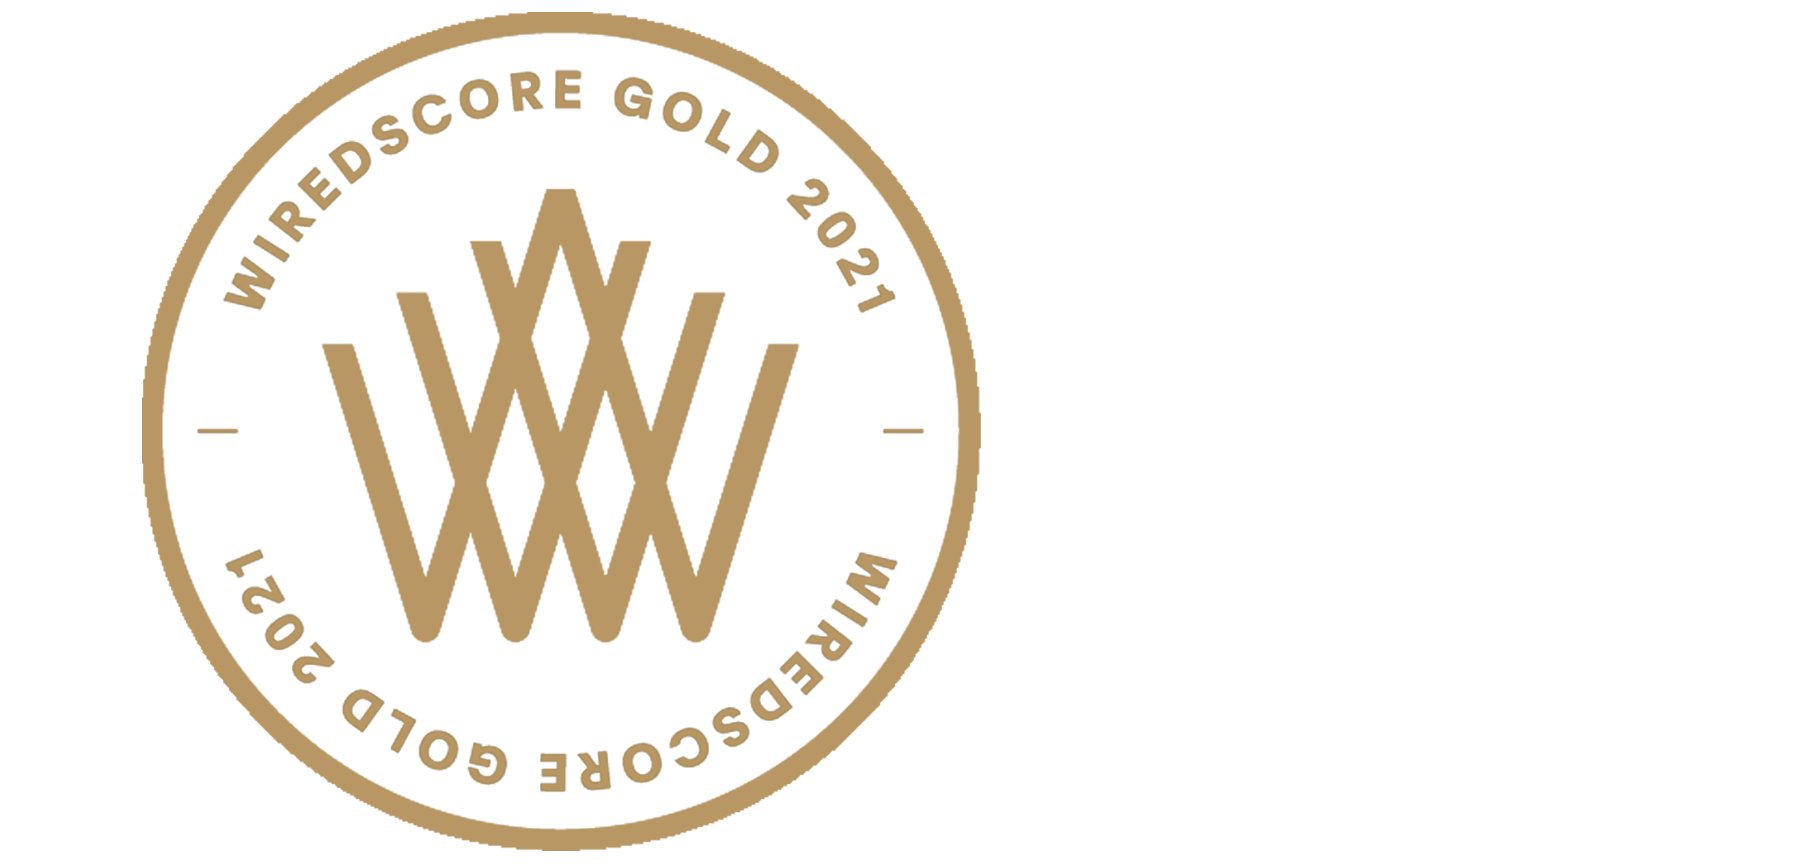 WS Wired Score Gold Web